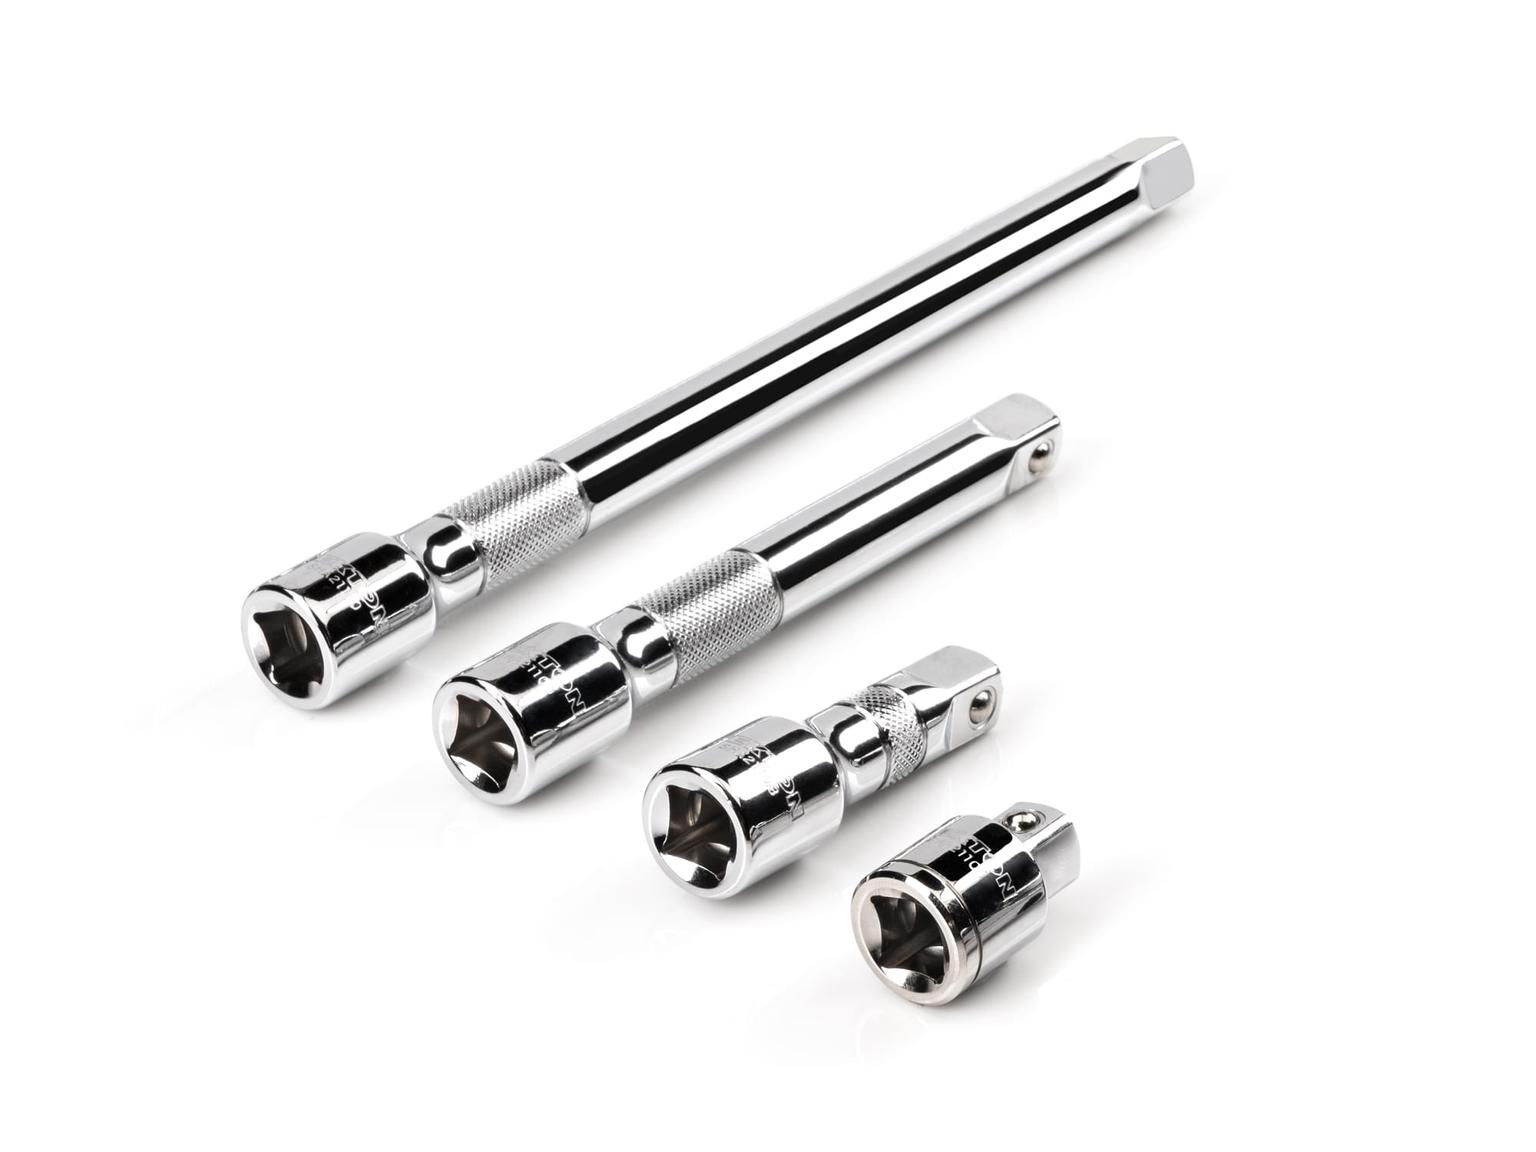 1/2 Inch Drive Extension Set, 4-Piece (1-1/2, 3, 6, 10 in.)